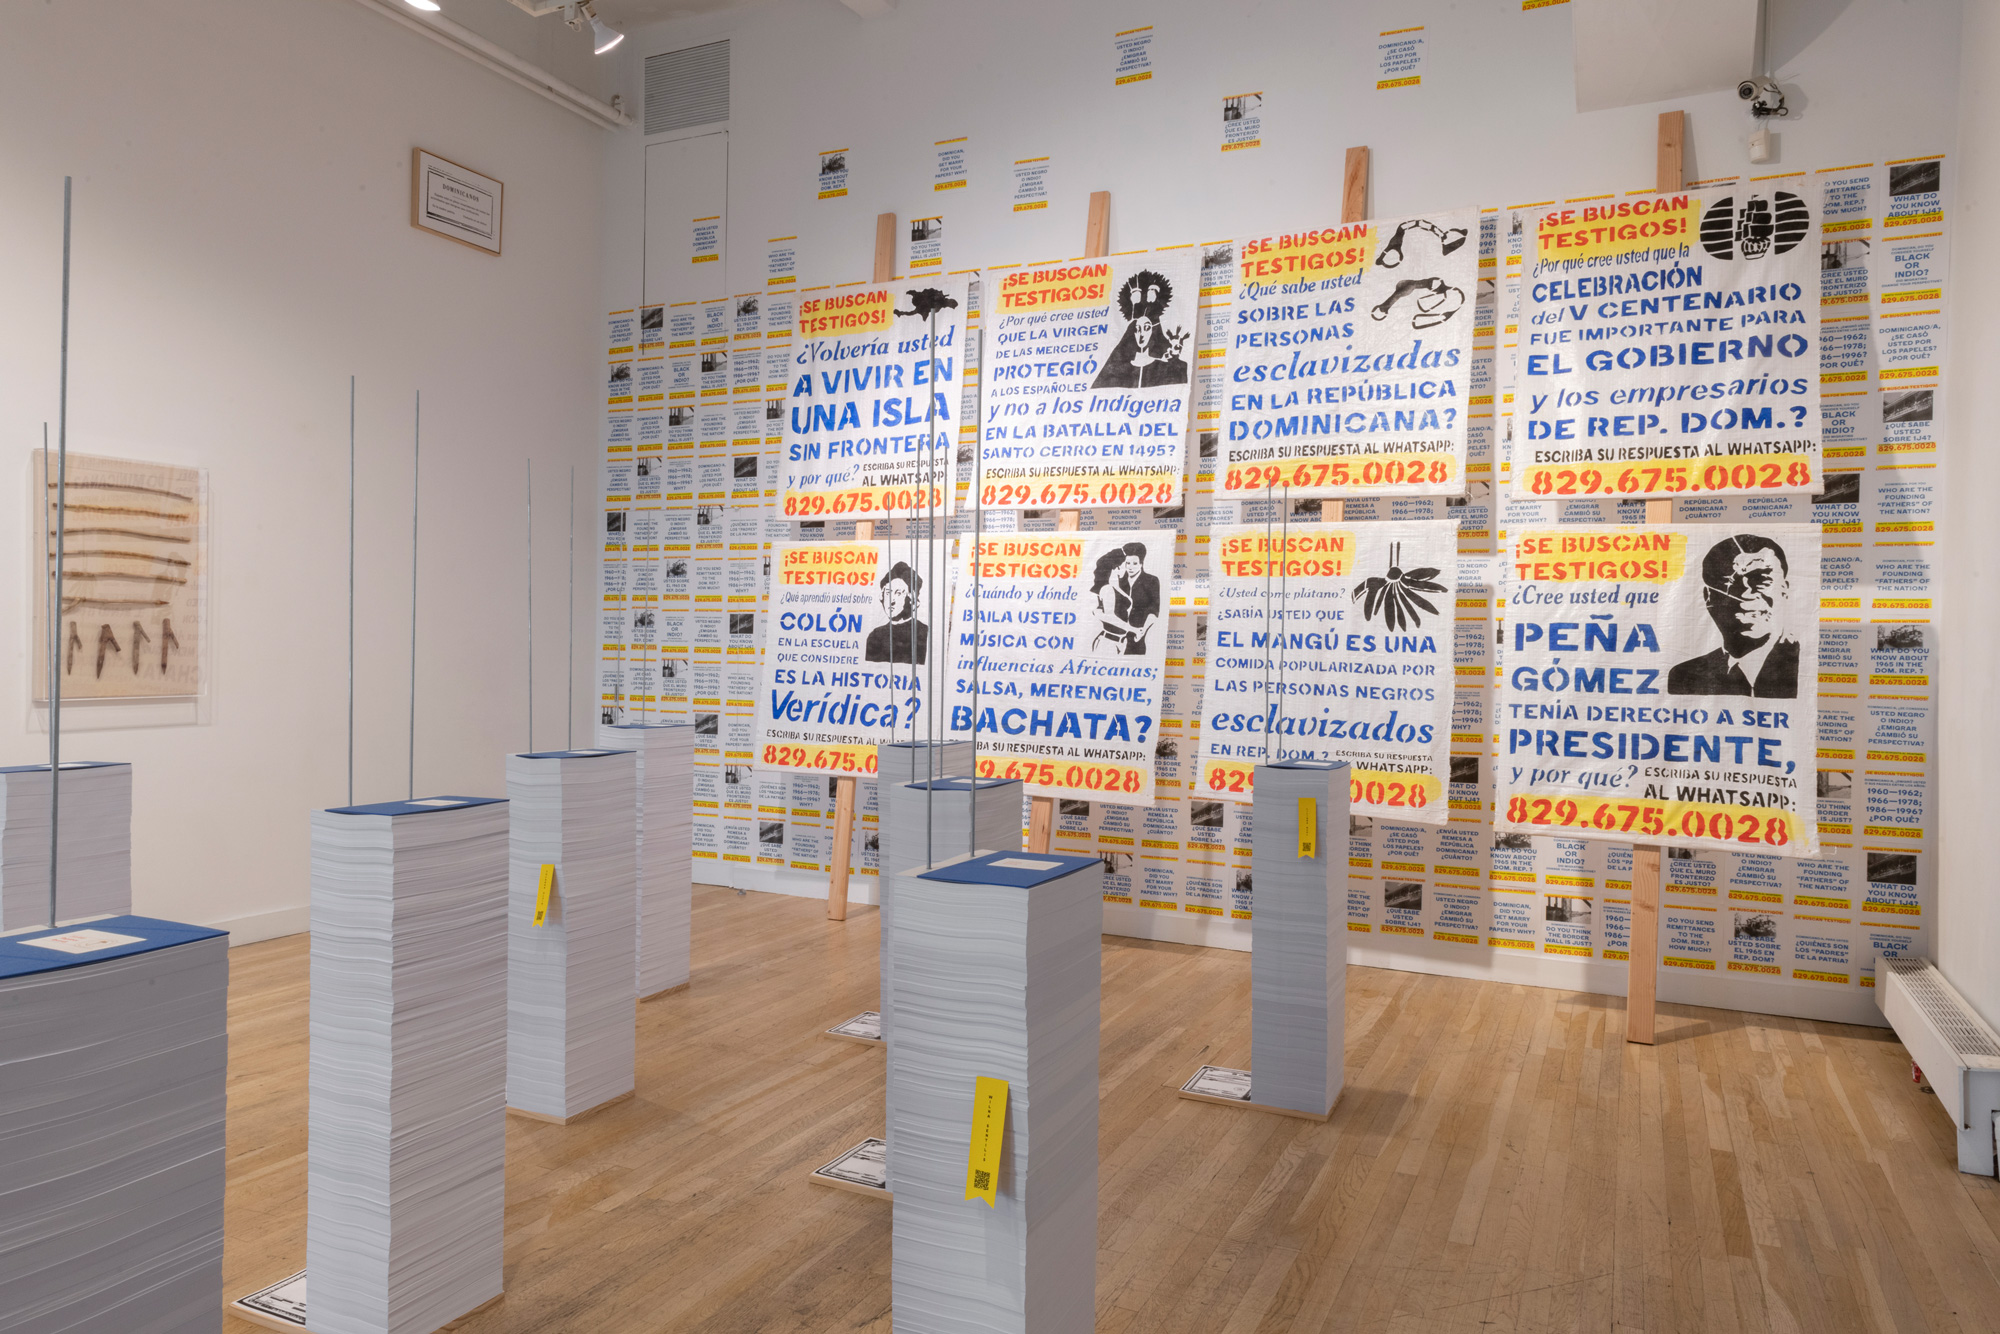 Installation view of exhibition. You can see a series of 20 books 5 feet tall and in the back a series of 8 posters on rice sack with blue, red, and yellow stamp letters.